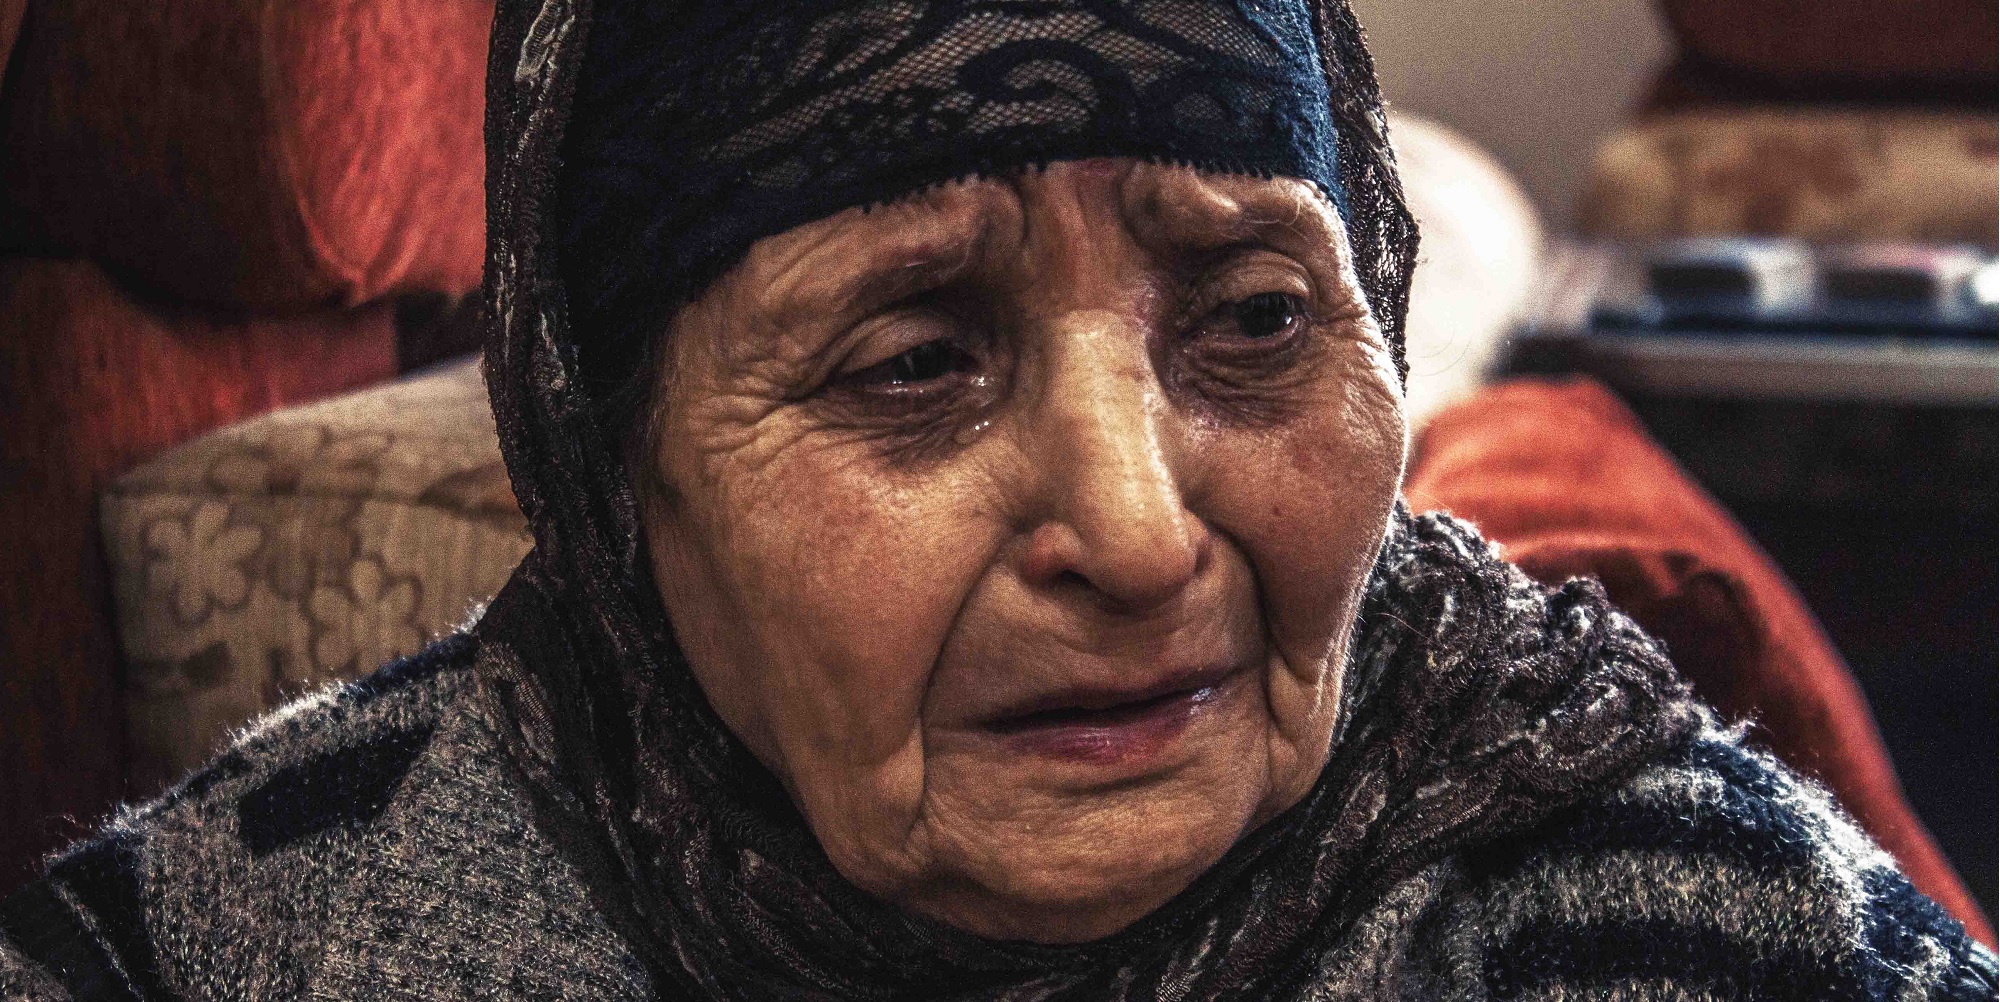  _168_https://www.helpage.org/silo/images/warda-85yearold-refugee-from-syria-in-tyre-lebanon-syria-page_2000x1002.jpg